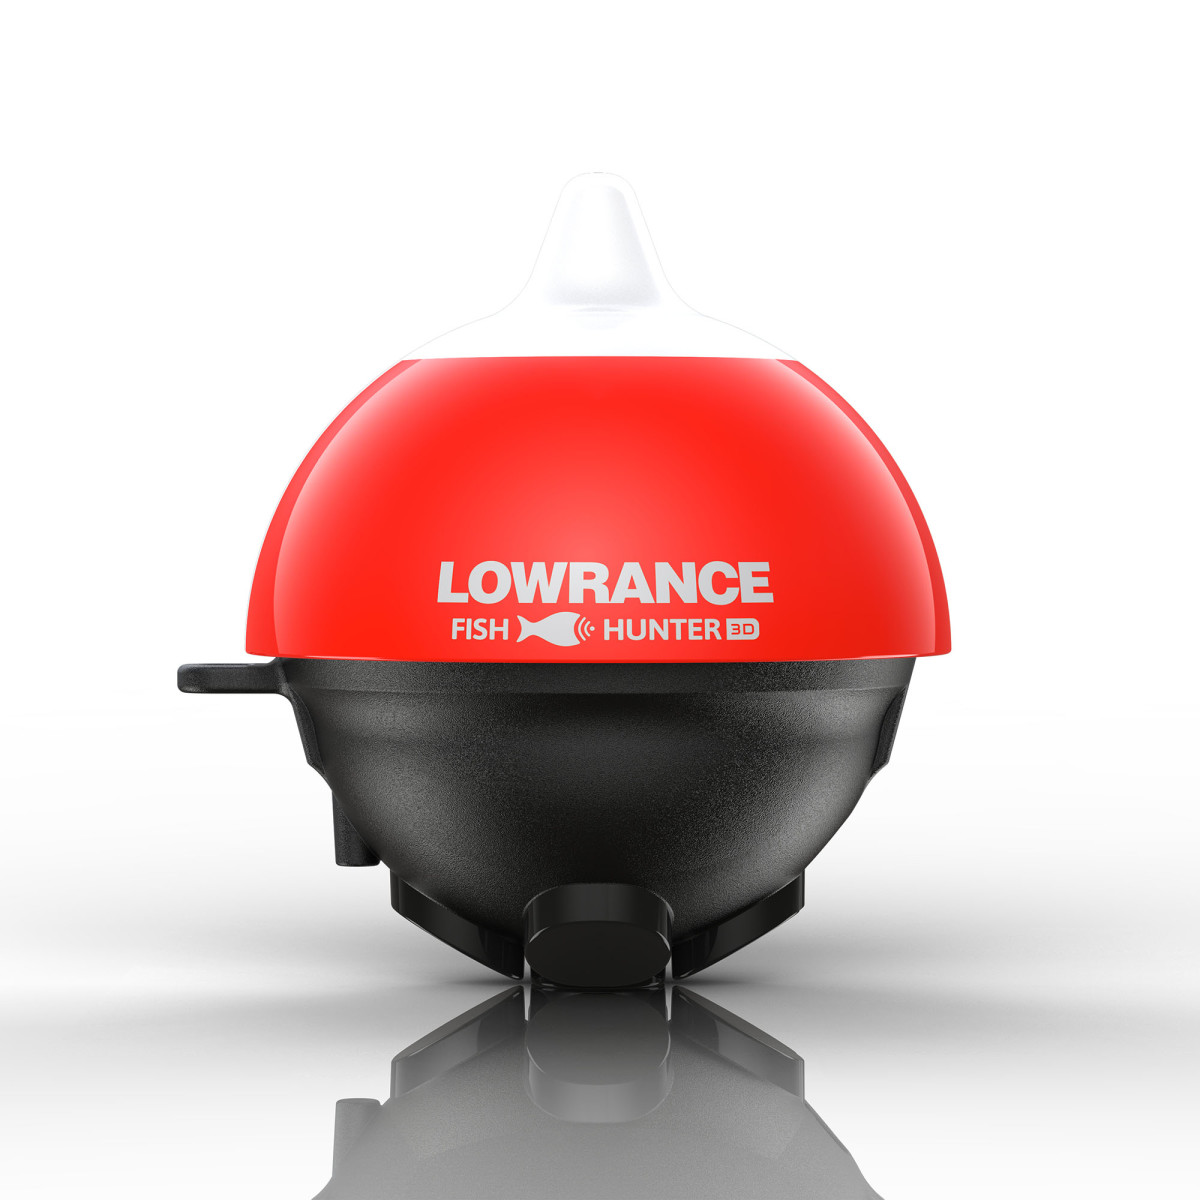 The Lowrance FishHunter 3D, a softball sized fish finder.